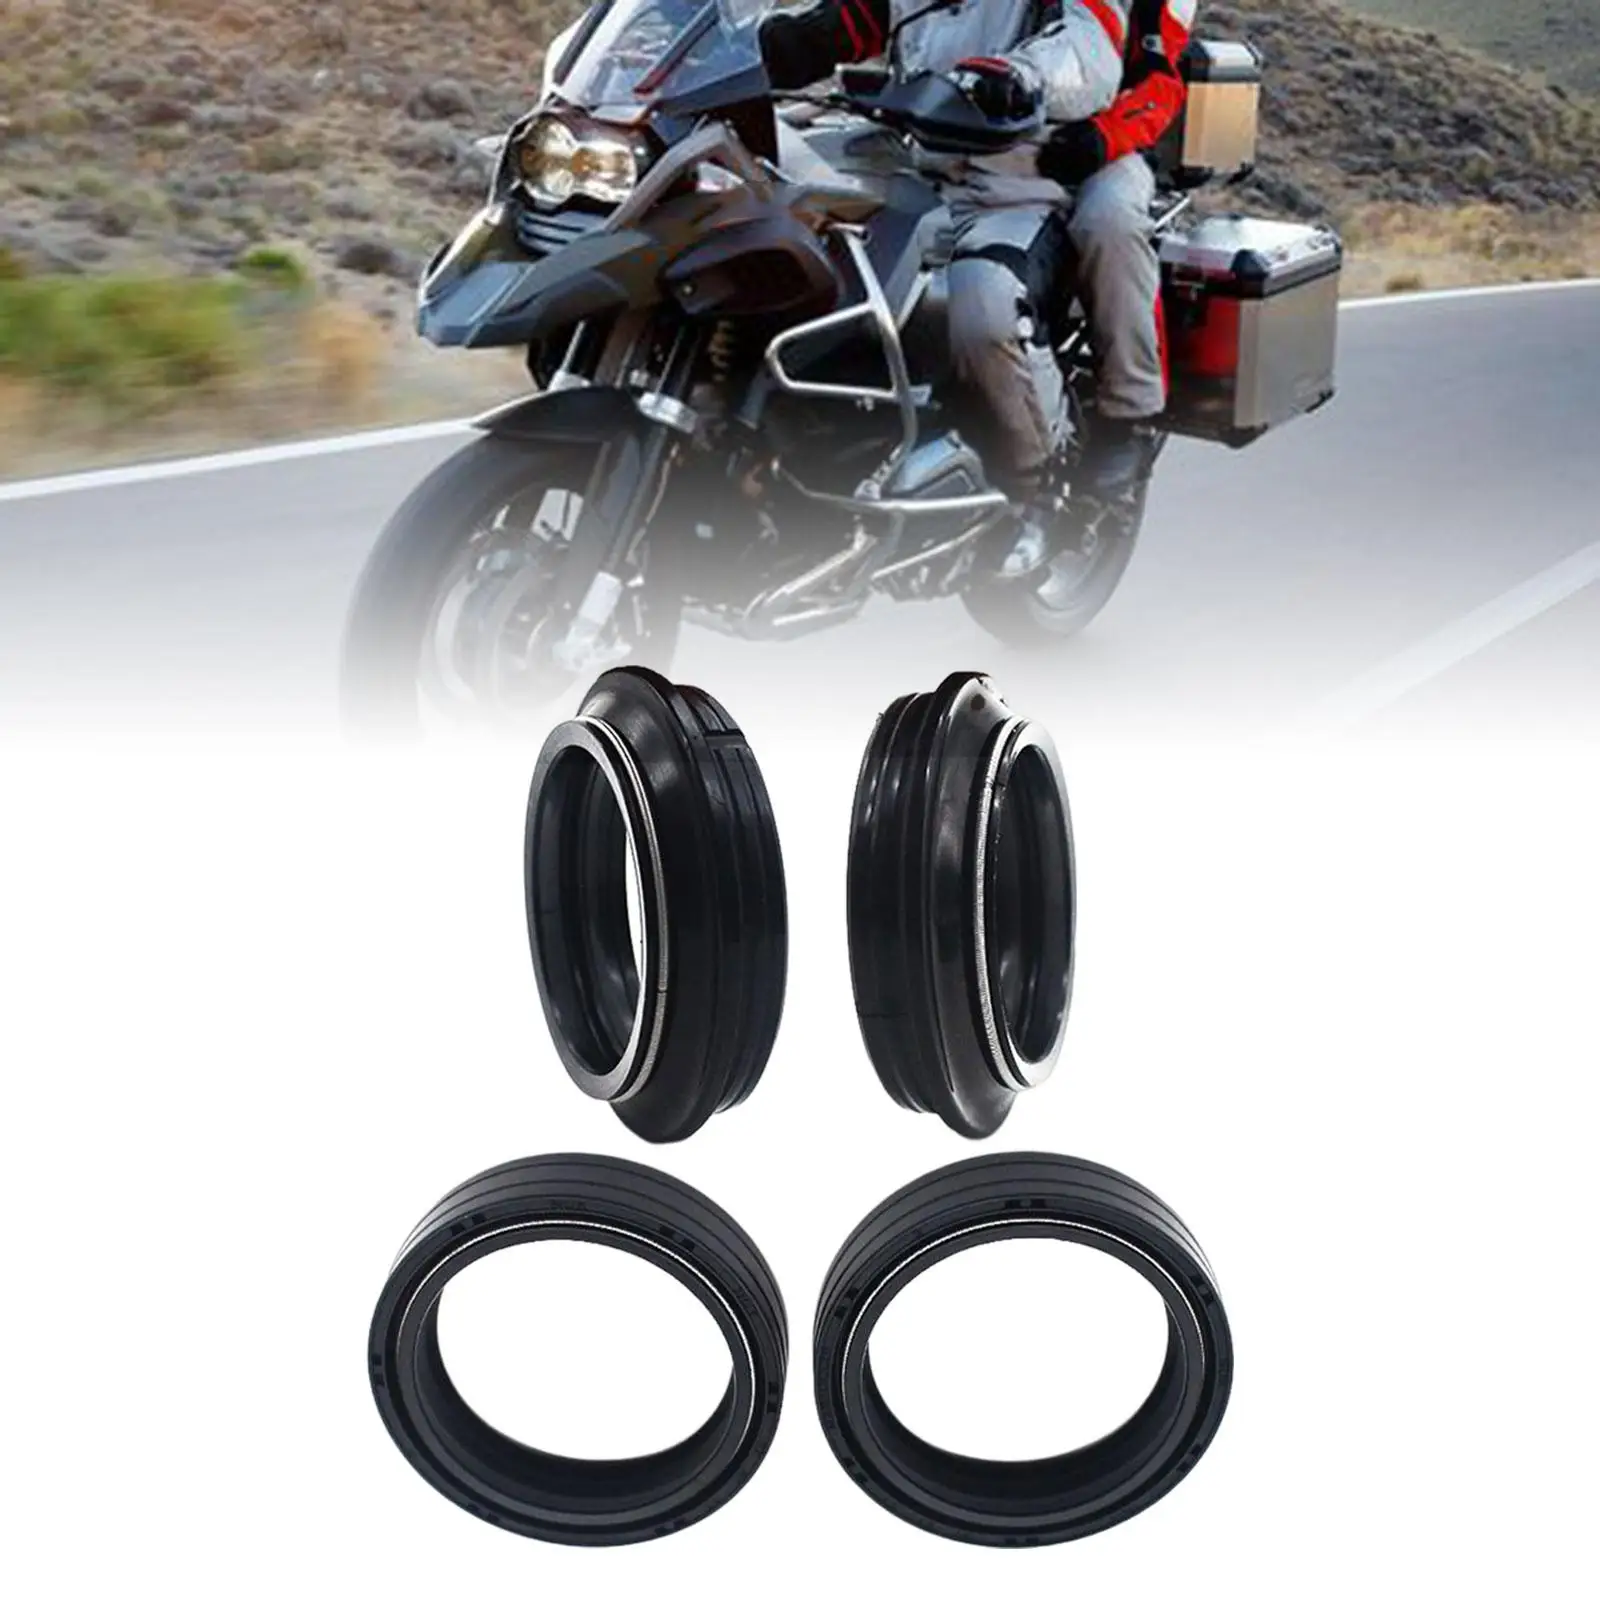 Fork and Dust Seal Kit Accessory for BMW R1200GS LC Adventure Durable